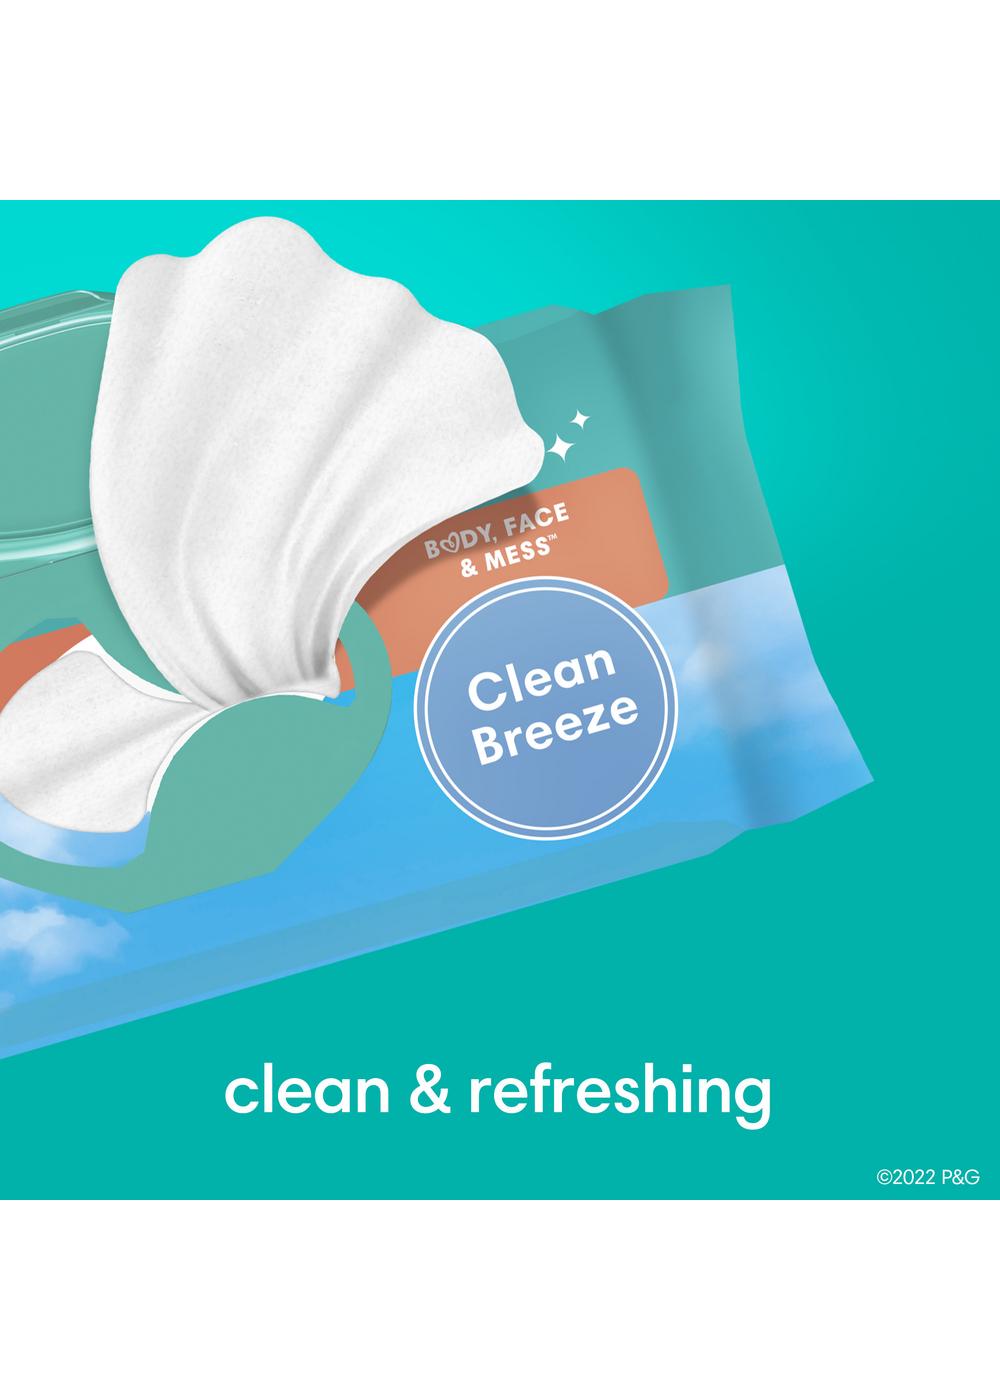 Pampers Multi-Use Clean Breeze Baby Wipes 3 Pk; image 4 of 8